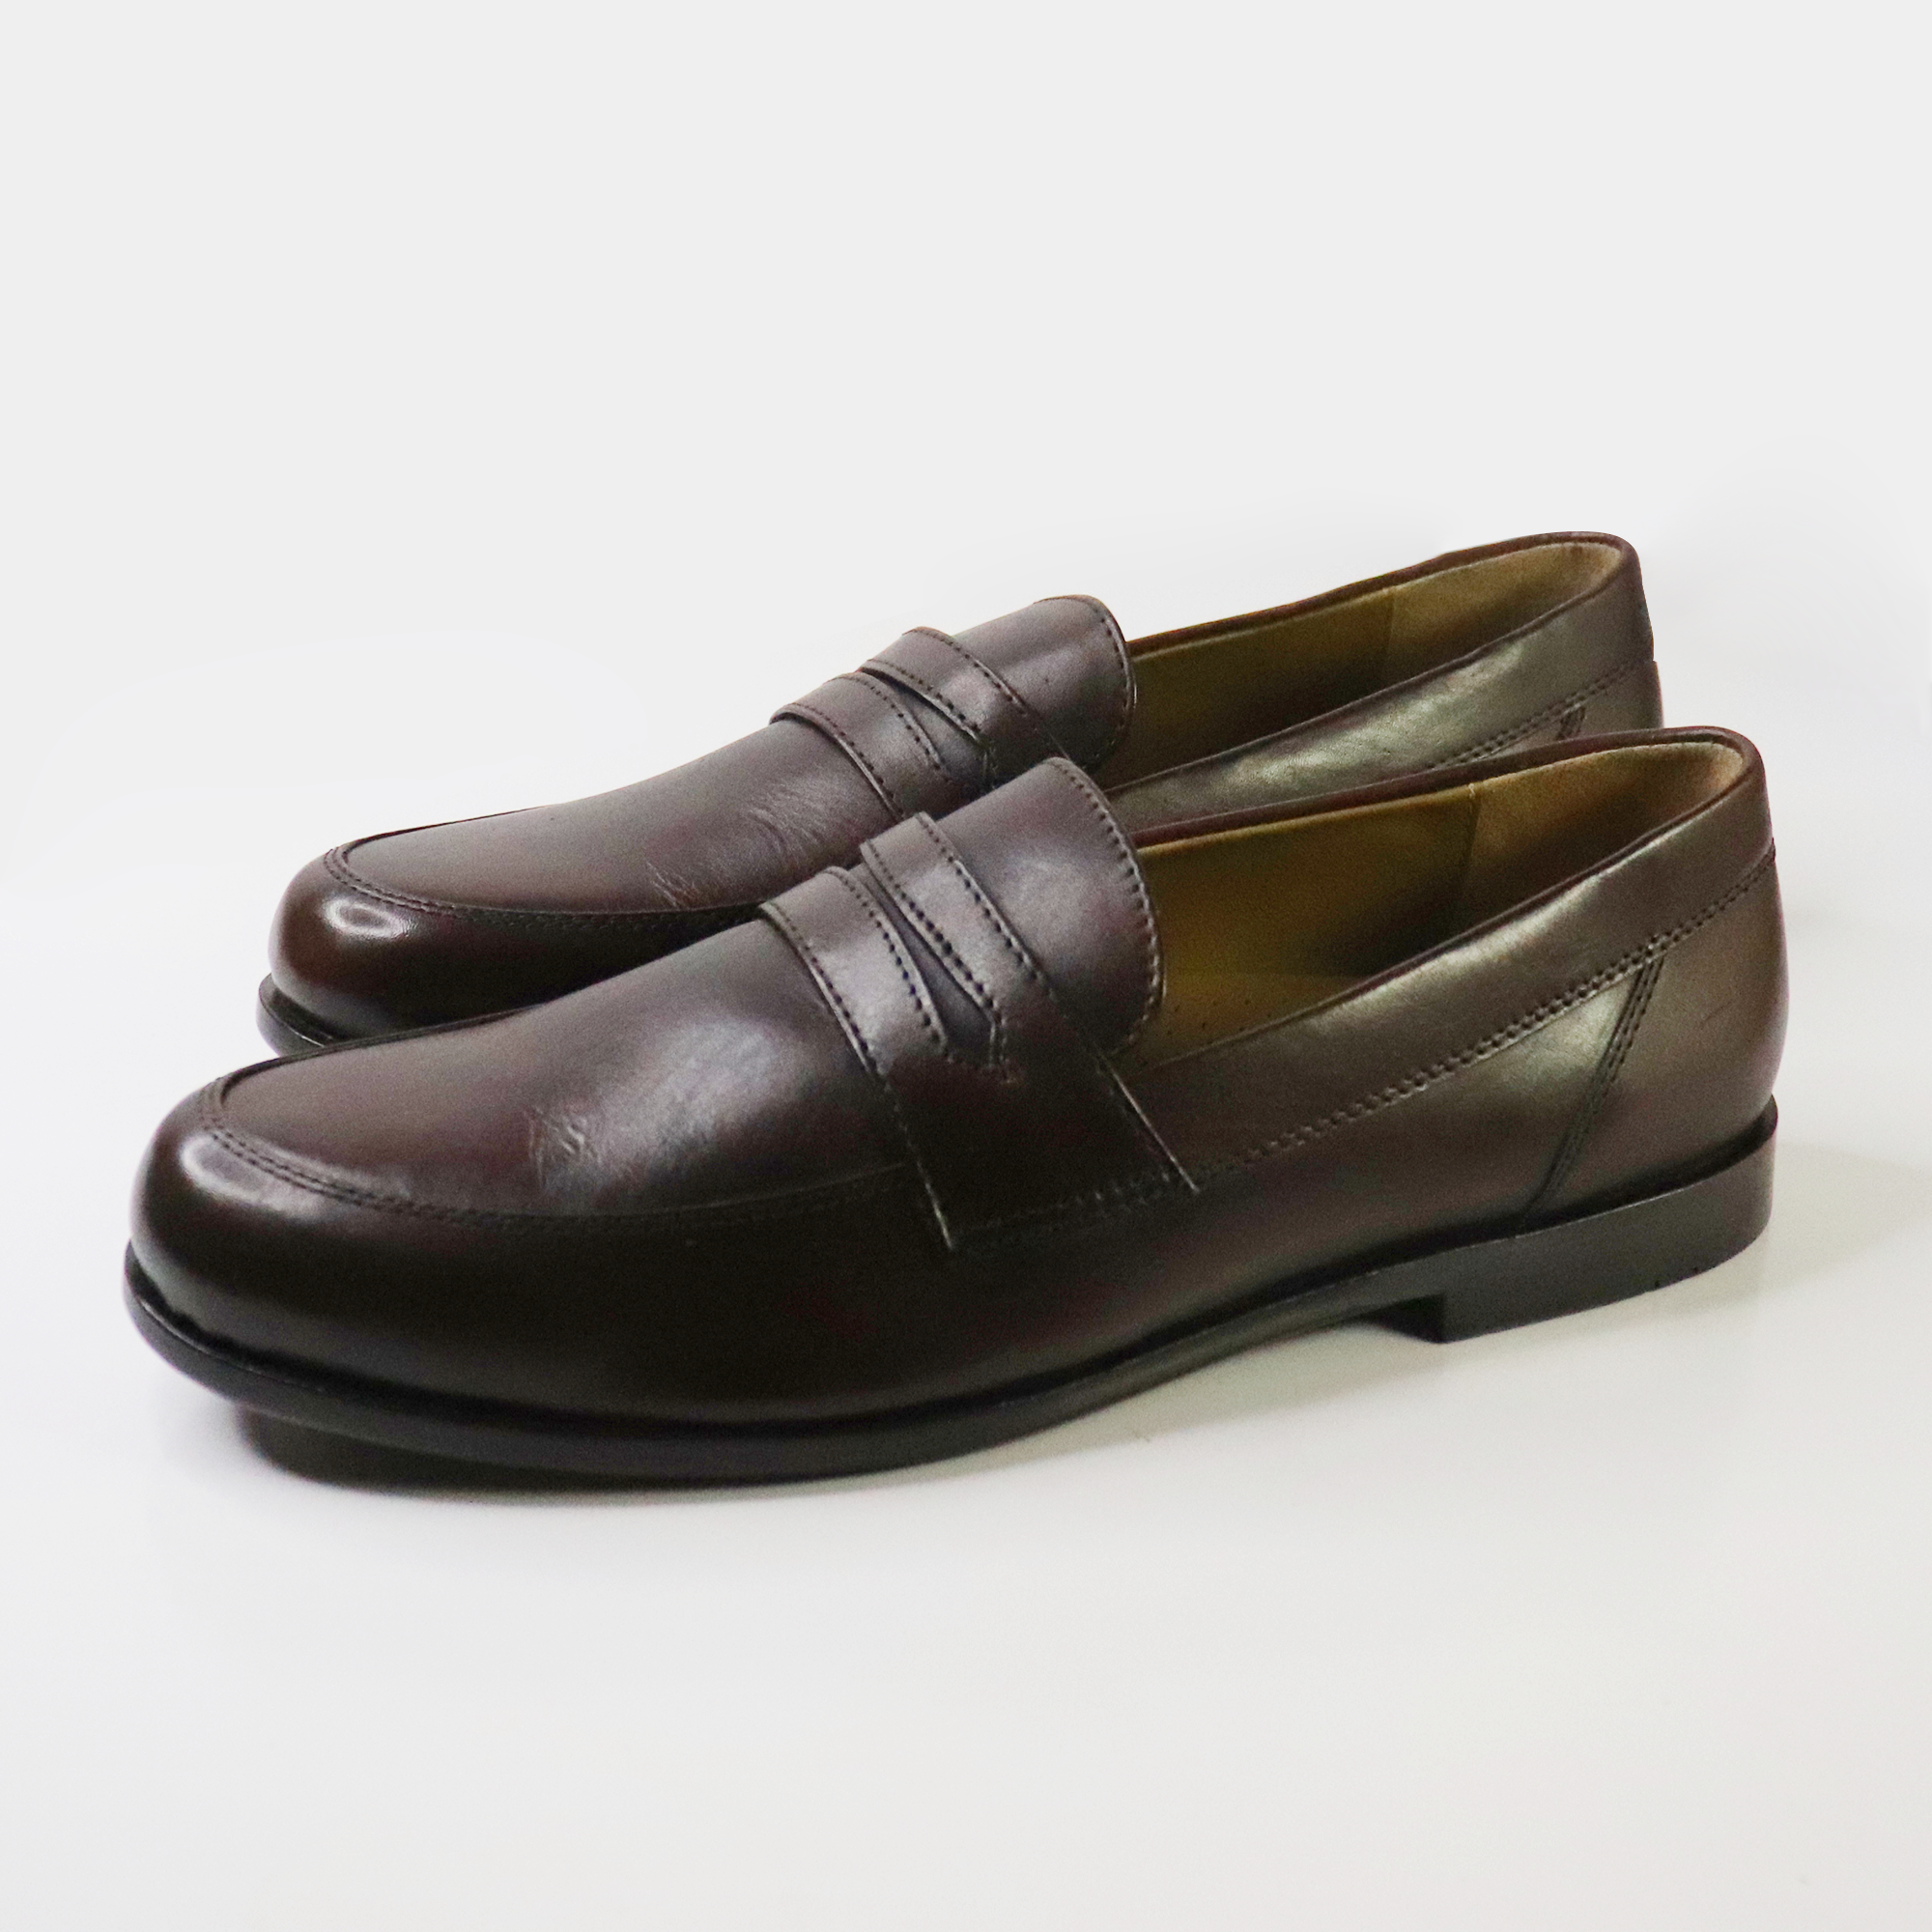 Men's Penny Lasted Genuine Leather Shoes Hand Crafted to perfection by renowned Mont Hawk Artisans. Loafers/Slip On